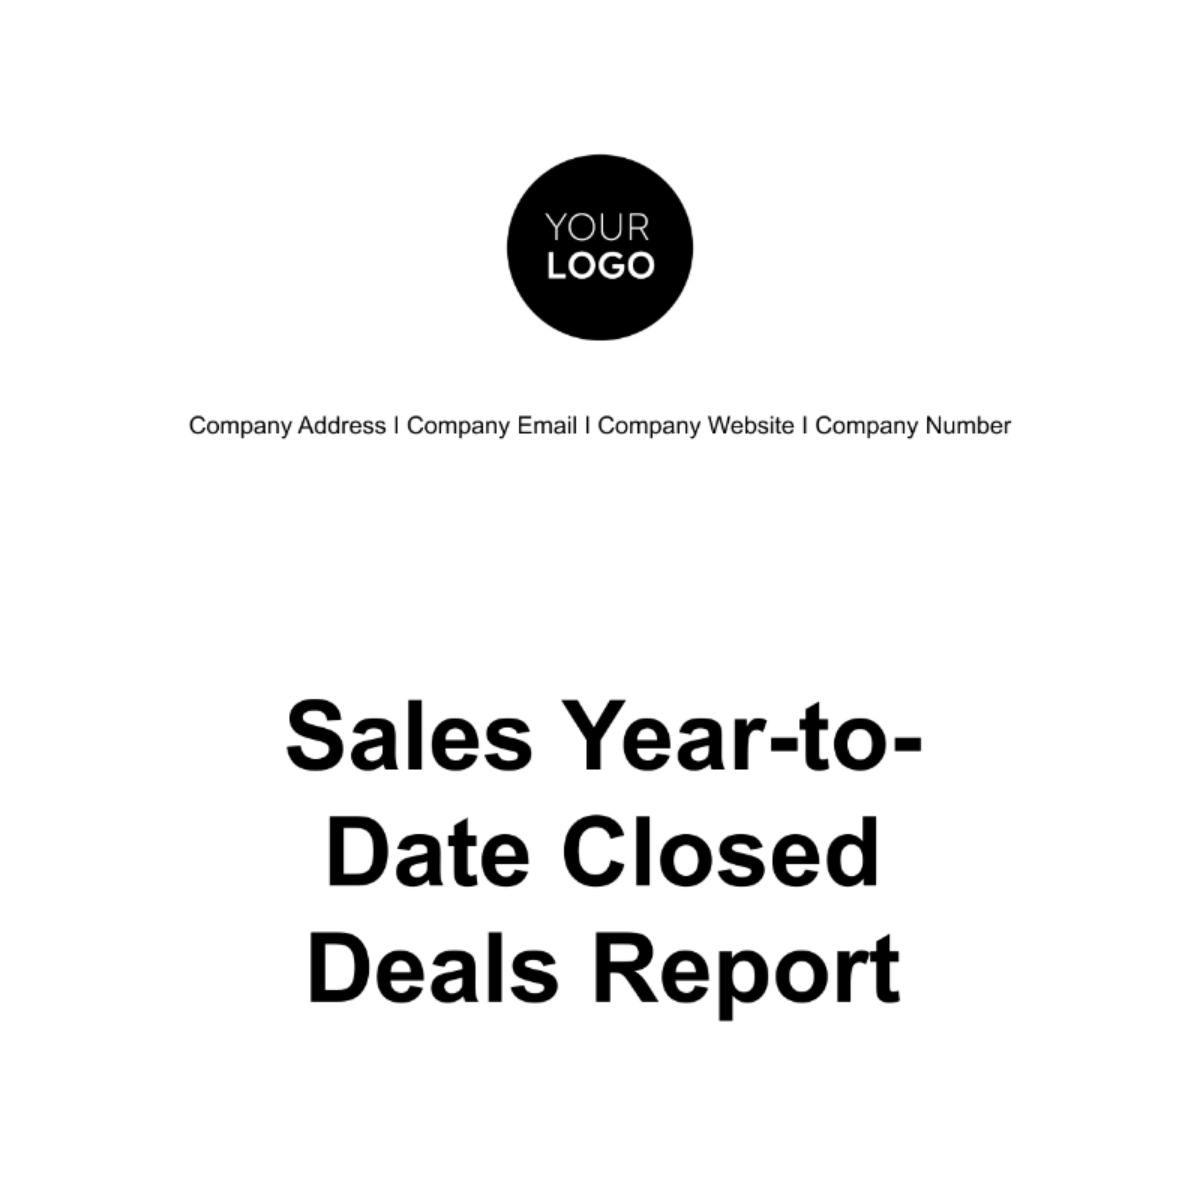 Sales Year-to-Date Closed Deals Report Template